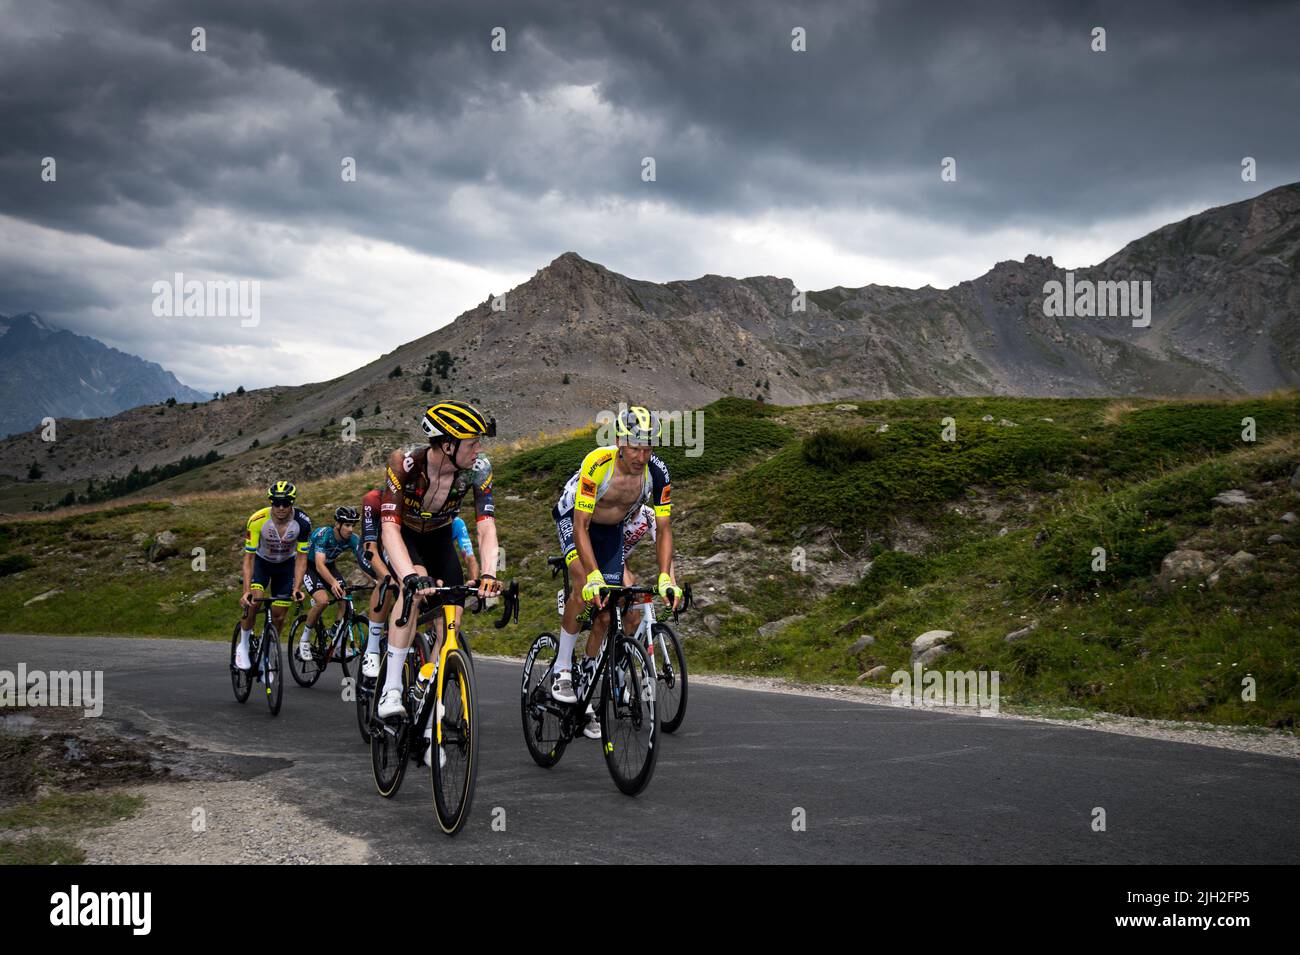 Belgian Nathan Van Hooydonck (Jumbo-Visma team) and Flemish Taco Van Der Hoorn (team Intermarché-Wanty Gobert Matériaux.) ahead a riders group in the last kilometers of the climb of the Col du Granon during the 11th stage of the Cycling Tour de France 2022. The 11th stage of the Tour de France 2022 between Albertville and the top of the Col du Granon with a distance of 151.7 km. The winner of the stage is the Danish Jonas Vingegaard (Jumbo Visma team) who also takes the first place in the general classification at the detriment of the Slovenian Tadej Pogacar (team UAE Emirates). Colombian Nair Stock Photo